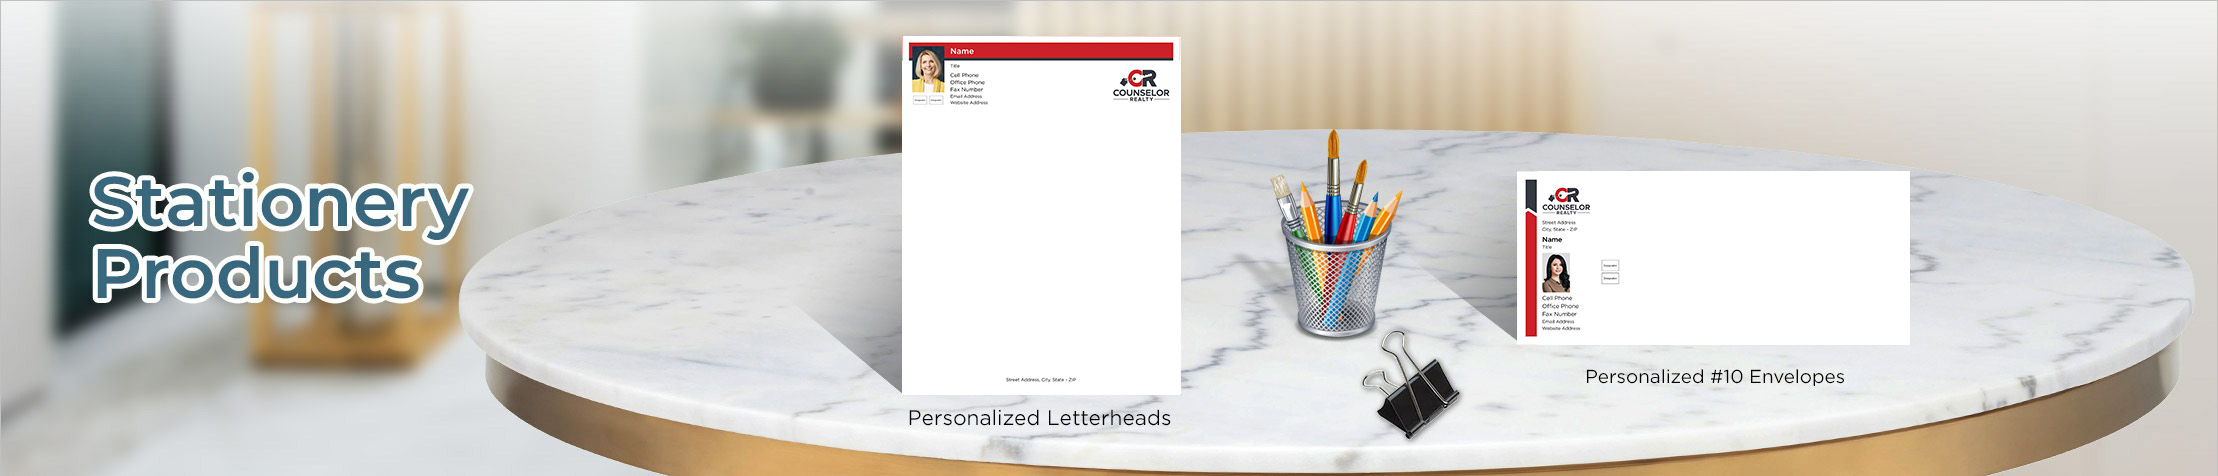 Counselor Realty Real Estate Stationery Products - Custom Letterhead & Envelopes Stationery Products for Realtors | BestPrintBuy.com